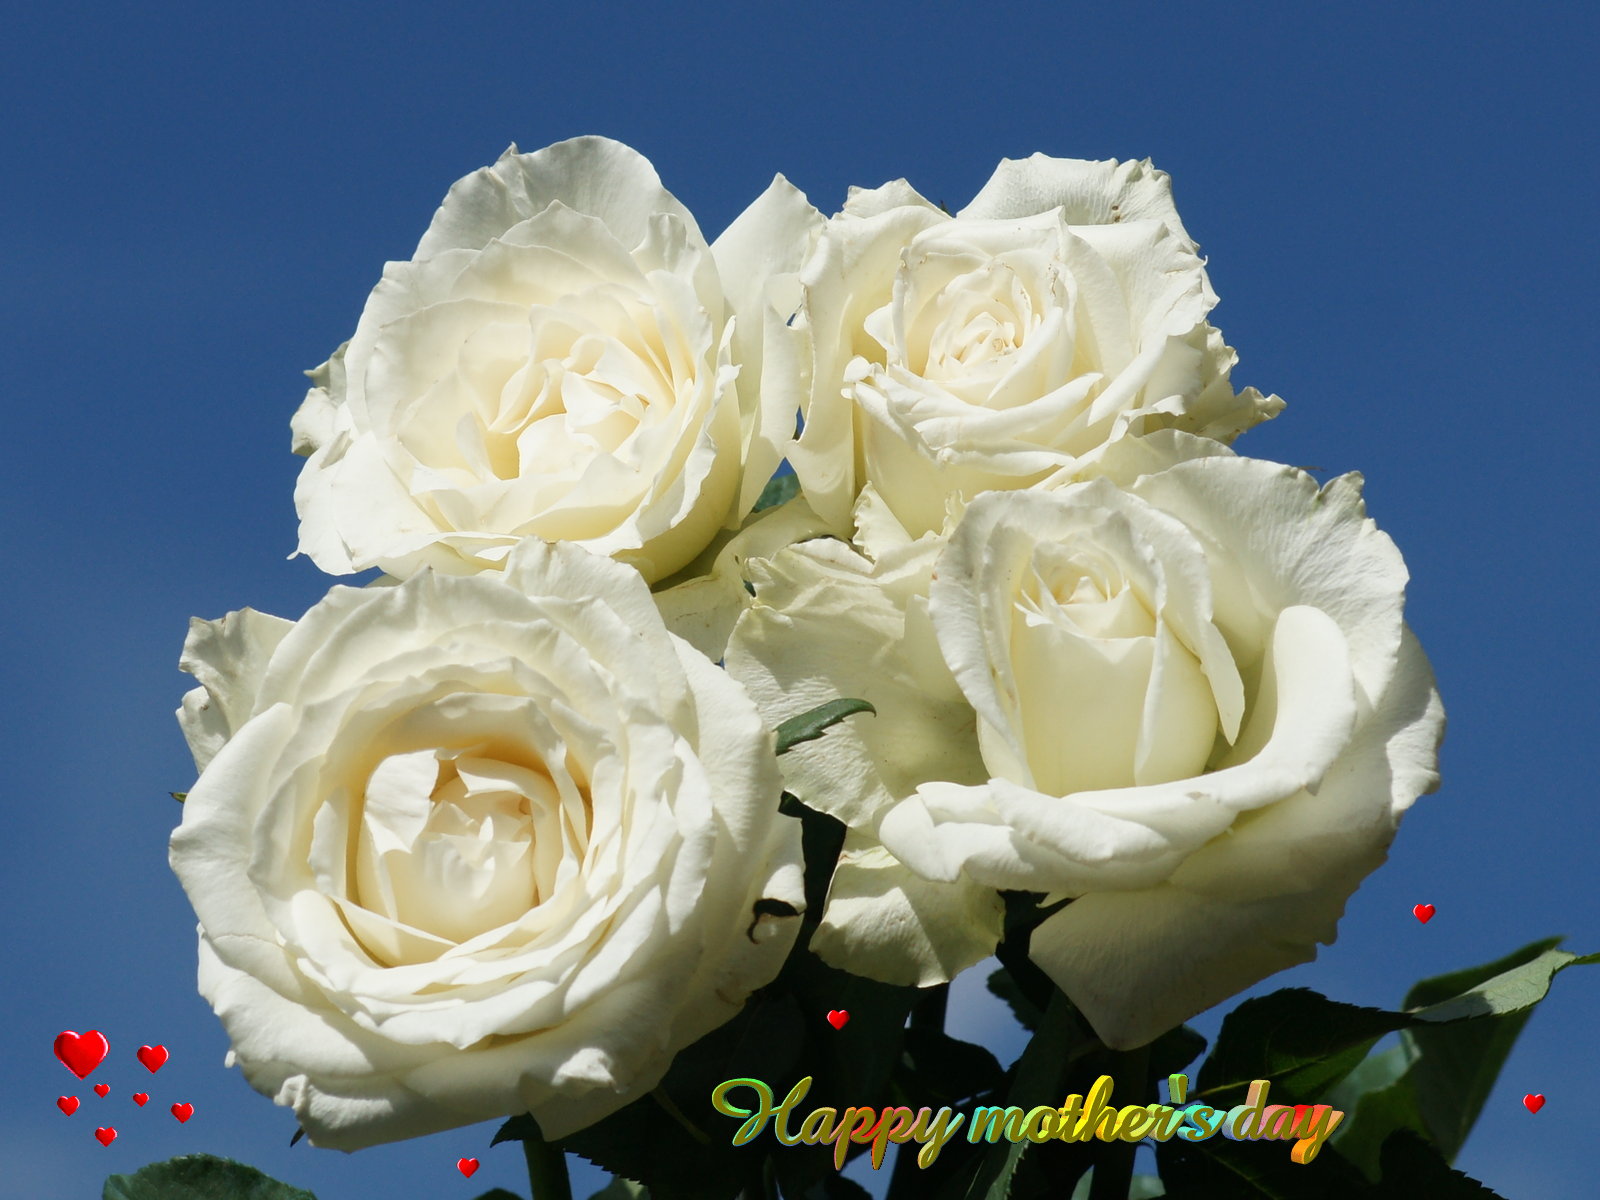 Mothers Day wallpaper beautiful flowers